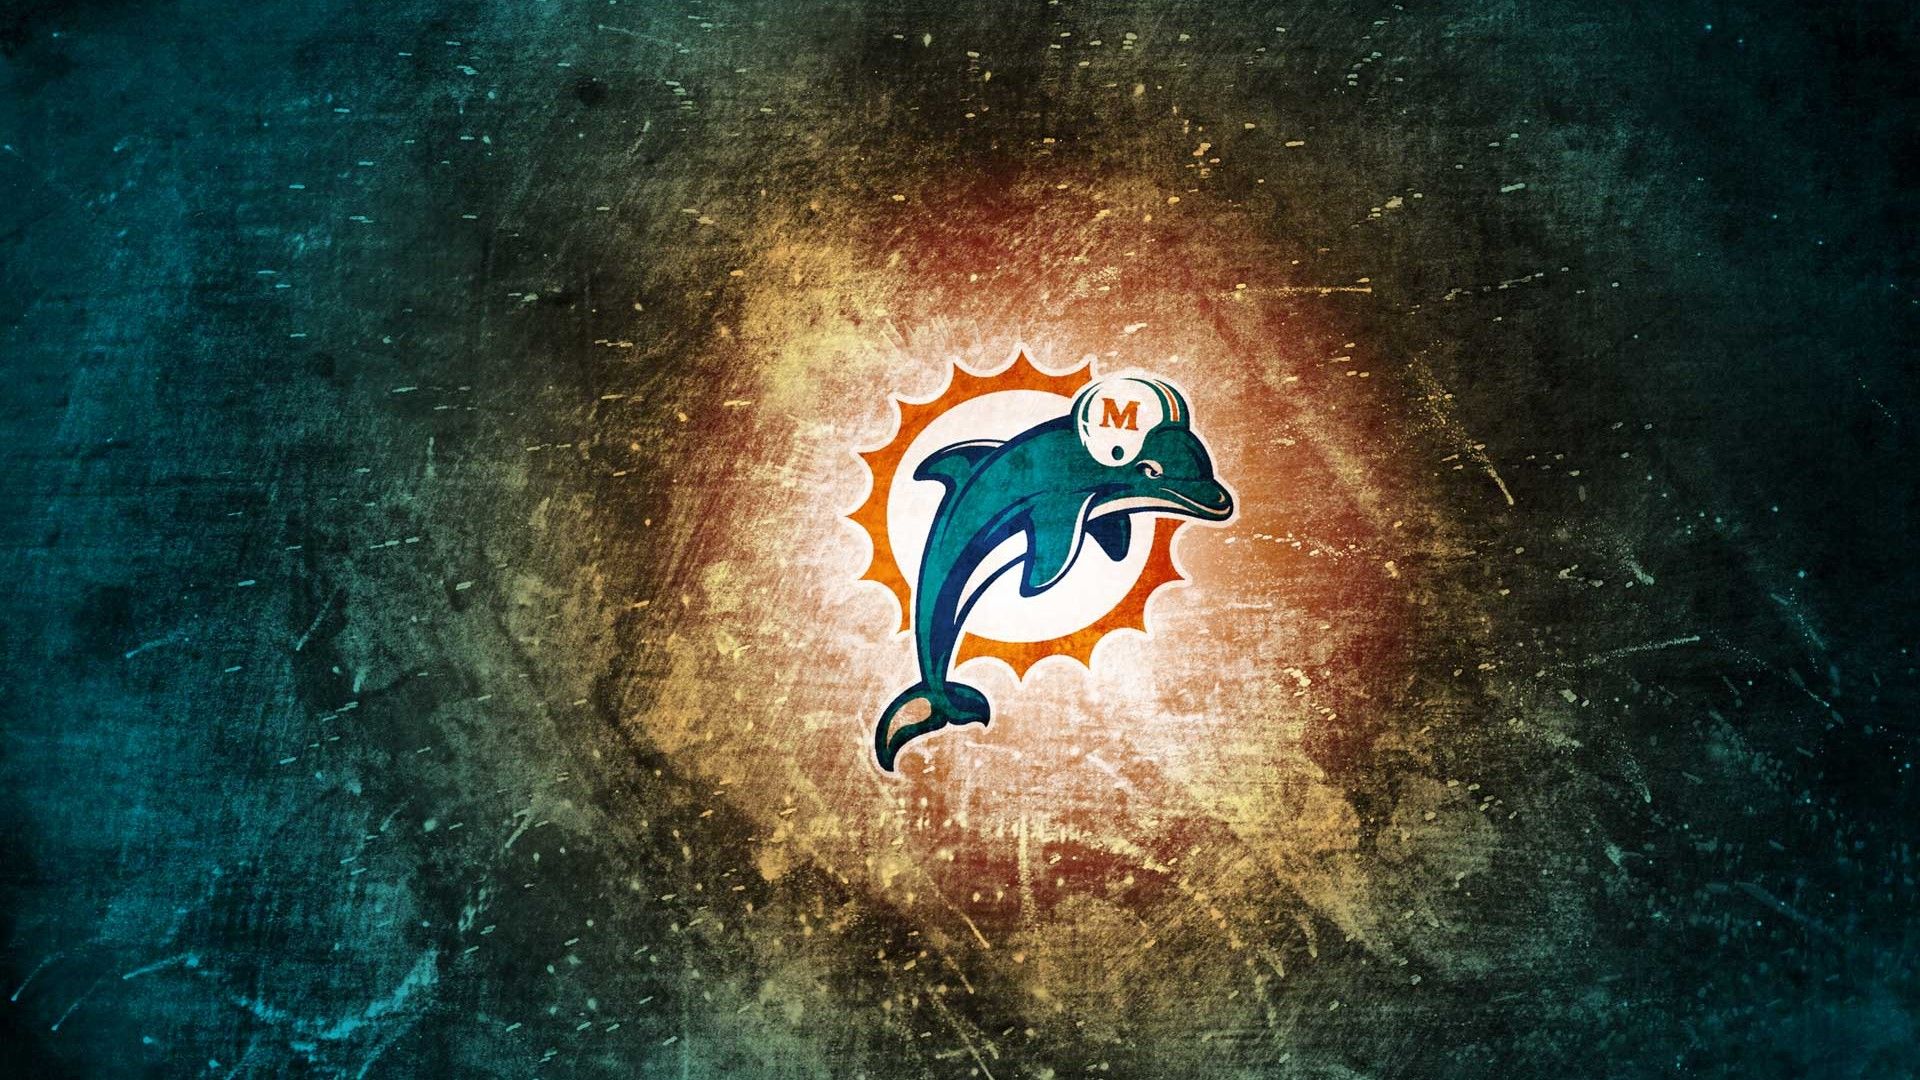 Miami Dolphins For PC Wallpaper NFL Football Wallpaper. Miami dolphins wallpaper, Miami dolphins logo, Dolphins logo